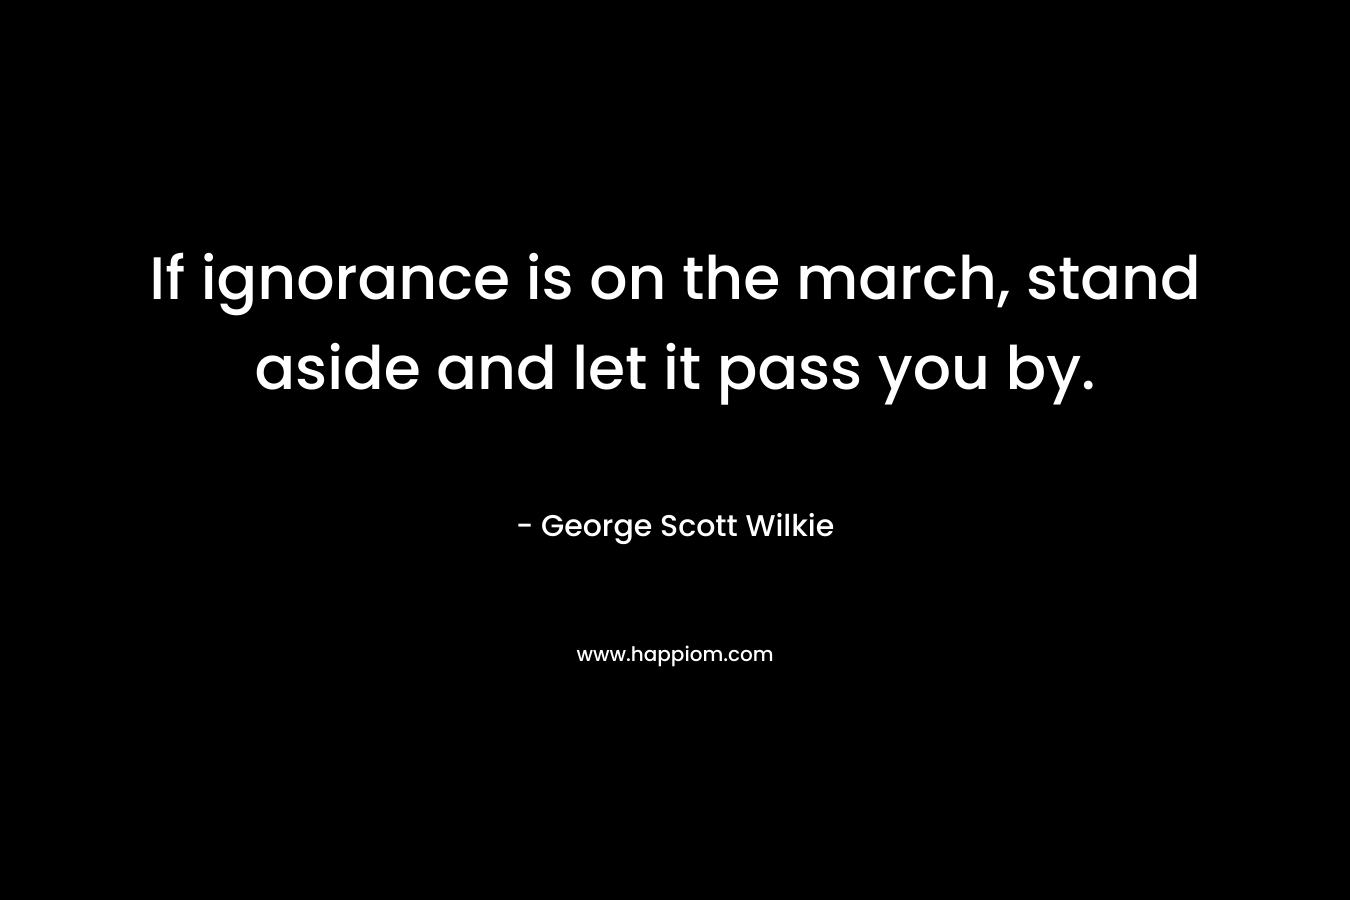 If ignorance is on the march, stand aside and let it pass you by. – George Scott Wilkie